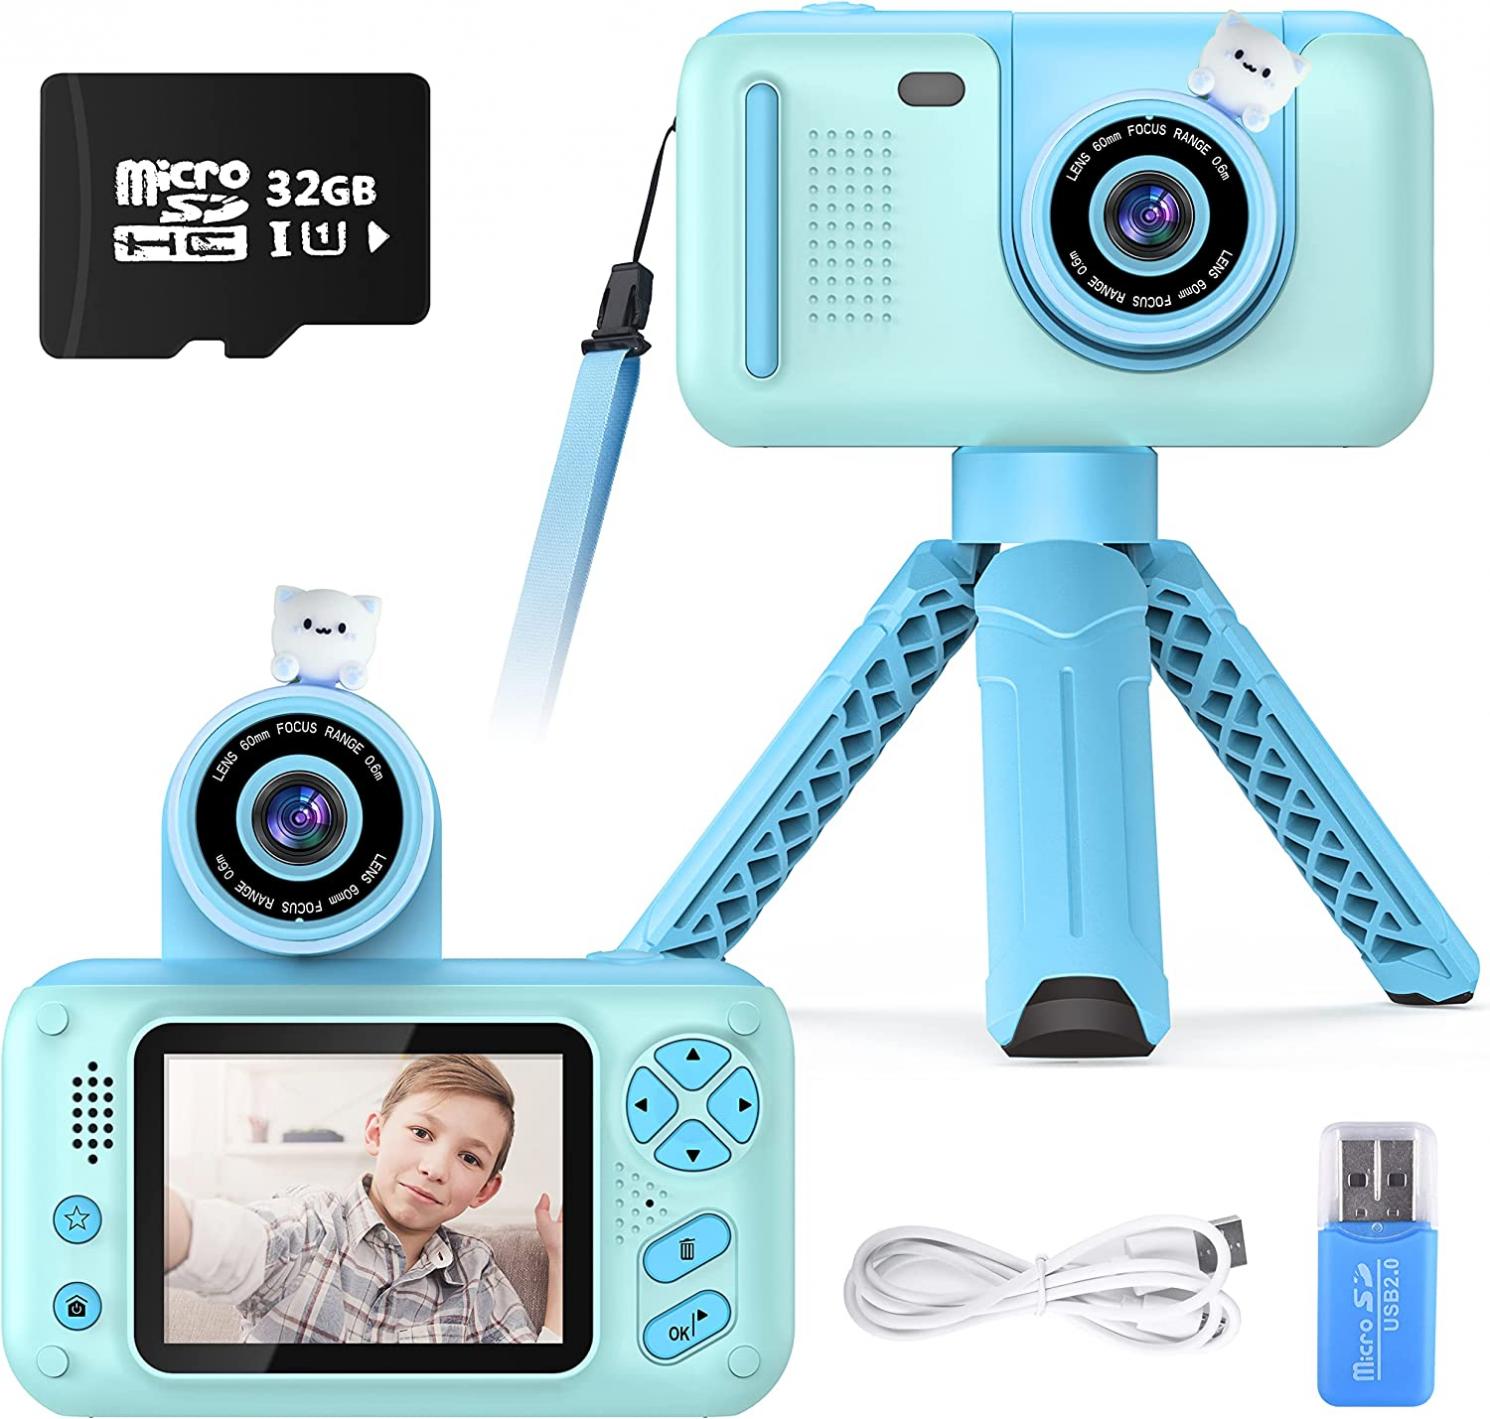 PURULU Kids Camera with Flip-up Lens for Selfie, HD Digital Camera for 3 4 5 6 7 8 Year Old Boys Birthday Gifts with 32GB SD Card